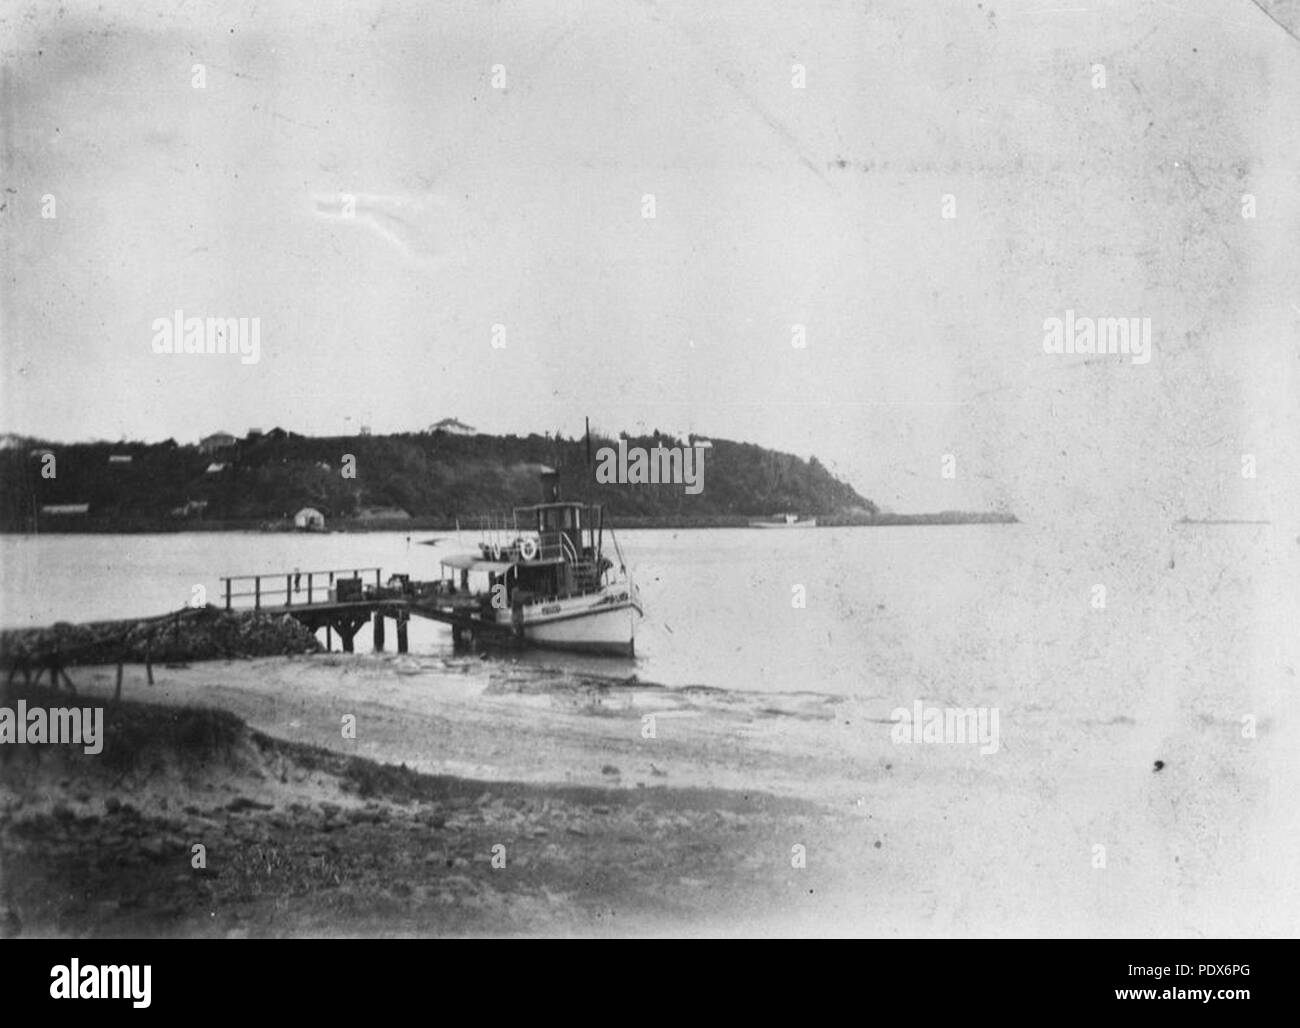 262 StateLibQld 1 295619 Boat docking at a jetty on Tweed River, 1905 ...